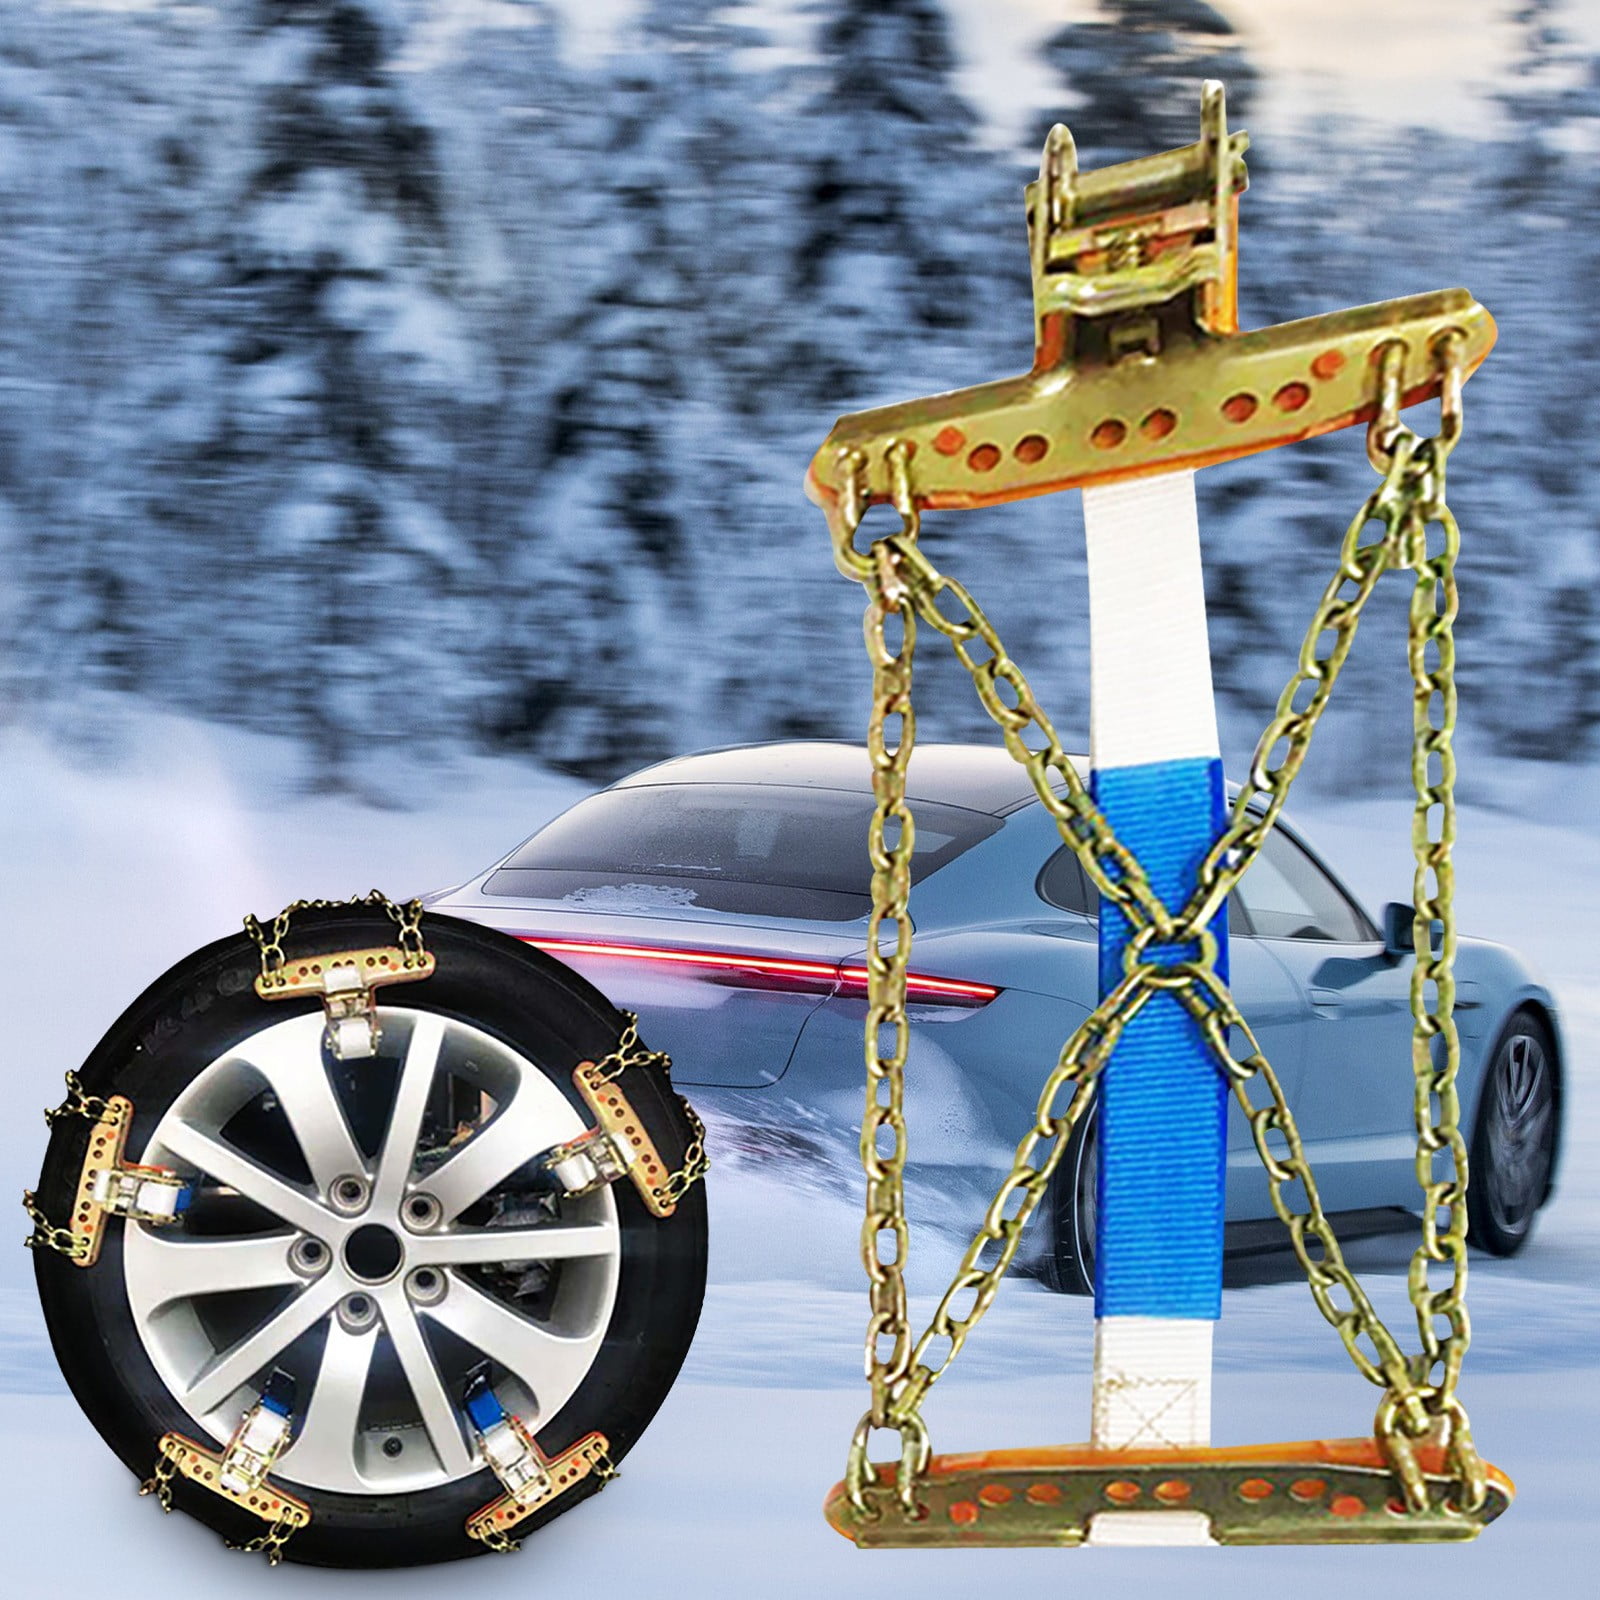 Snow Chains,Anti-Slip Car Chains Snow Chains - 8 Pack Snow Chains for Car  for Tire Width 165-275mm(6.4-10.9inch), Adjustable Universal Thickening